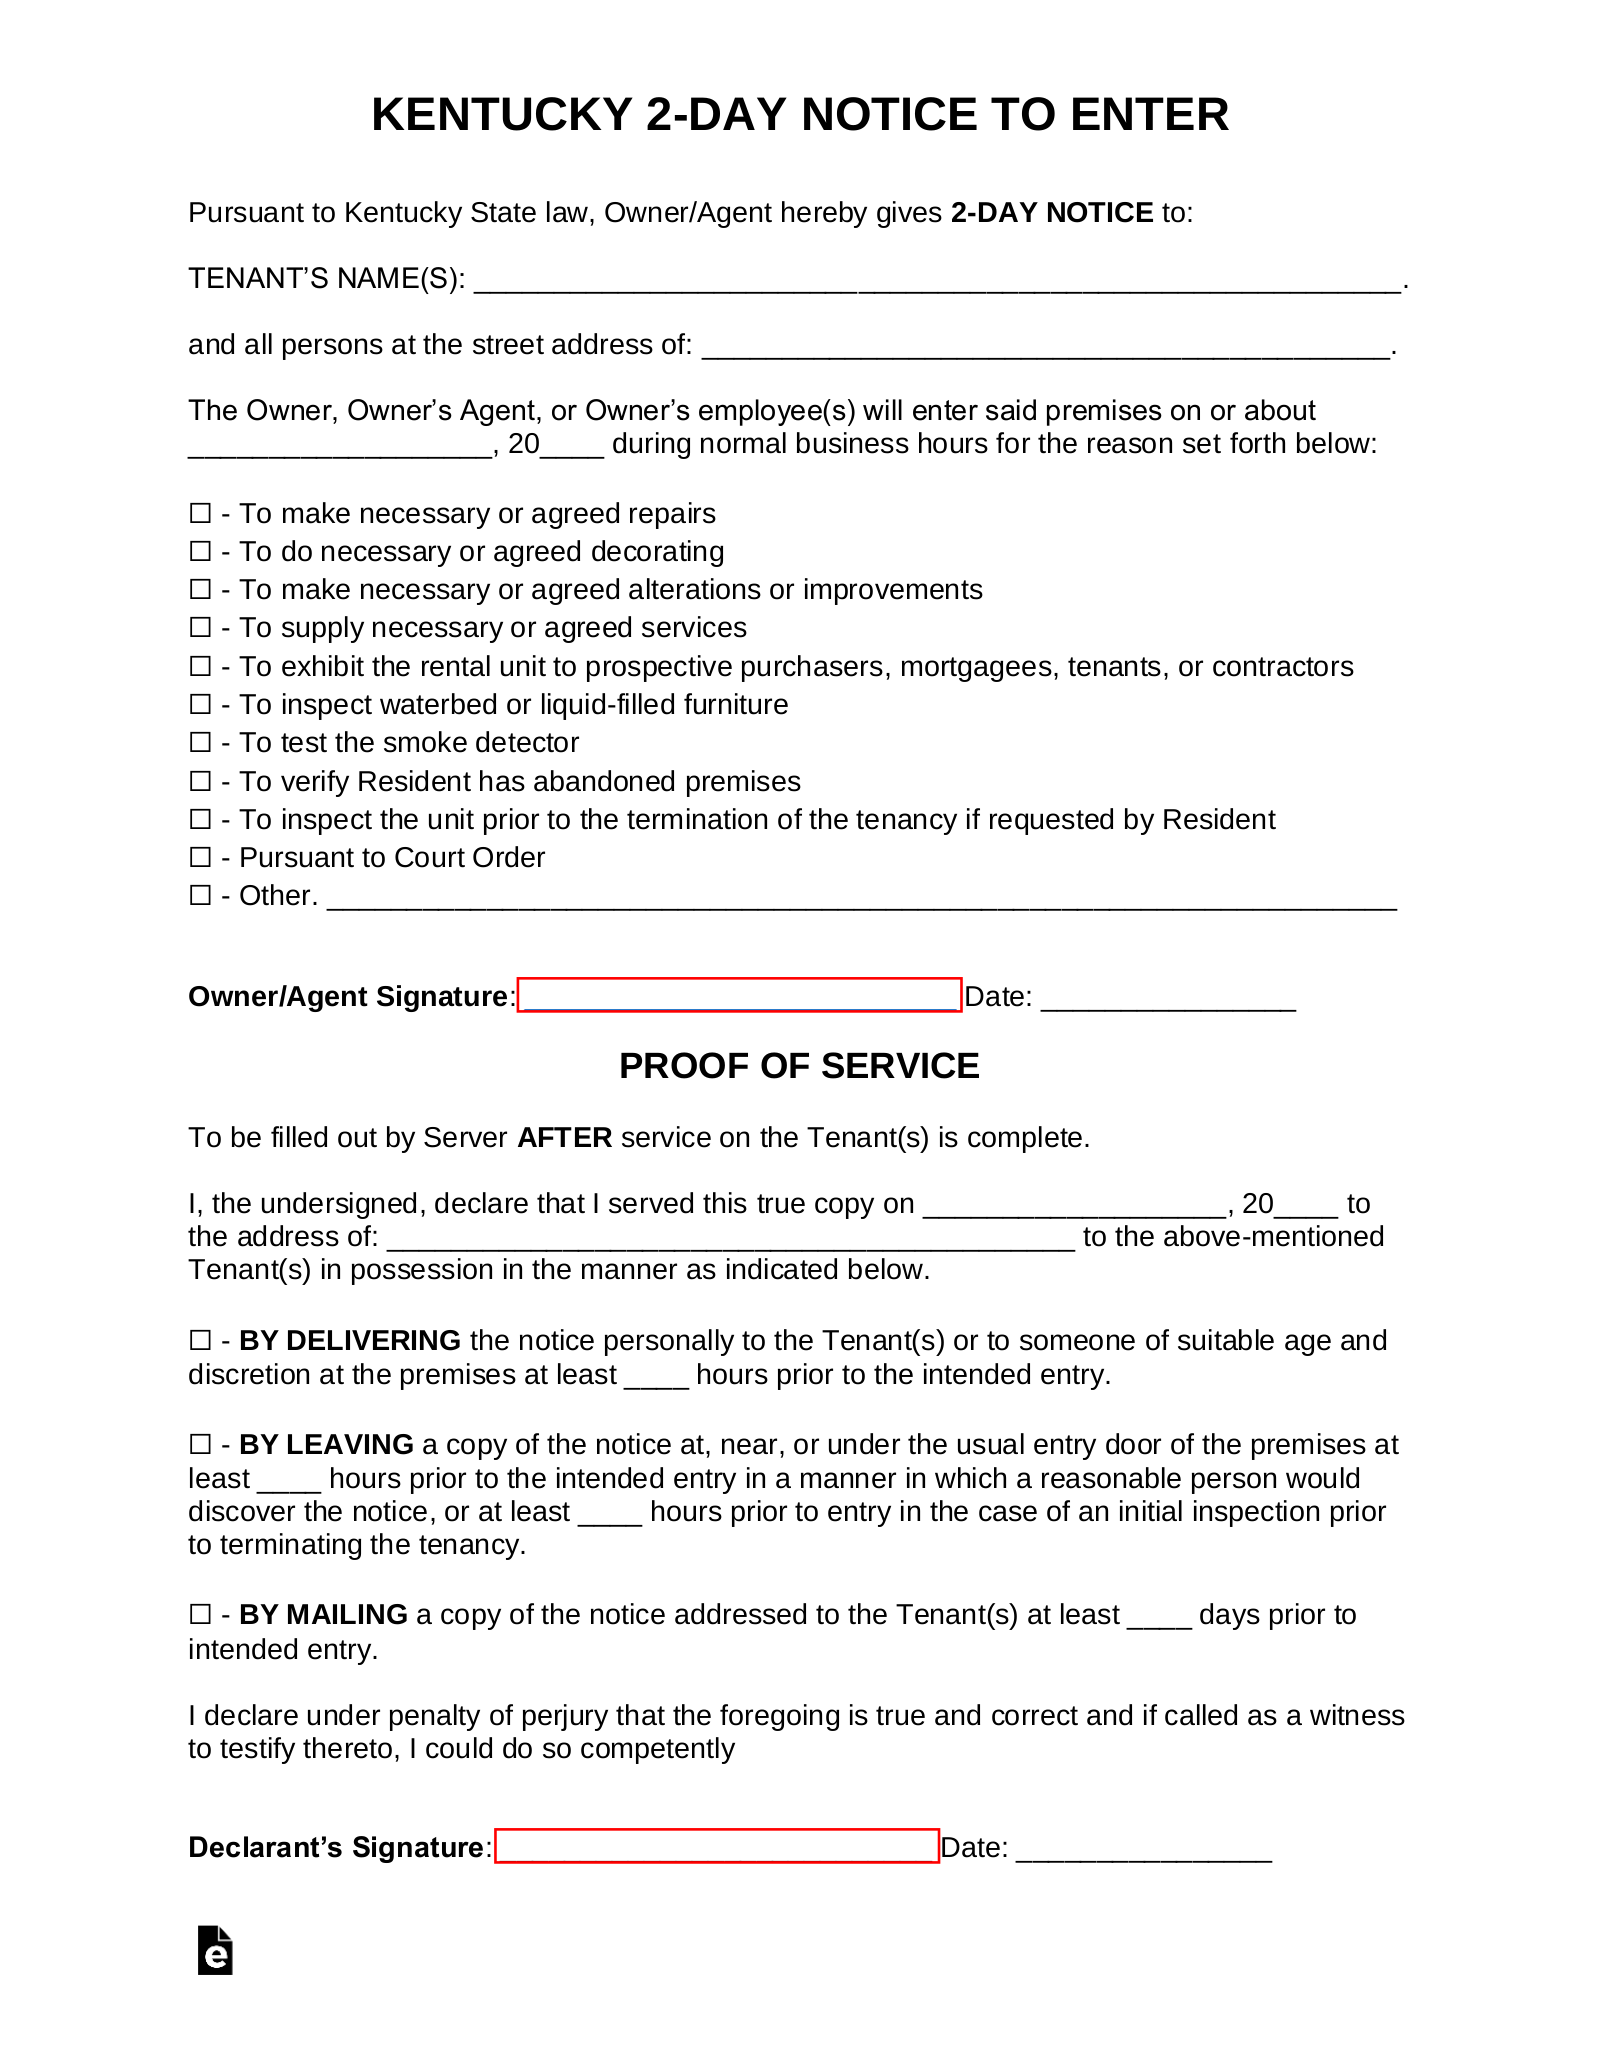 free-kentucky-2-day-landlord-notice-to-enter-form-pdf-word-eforms